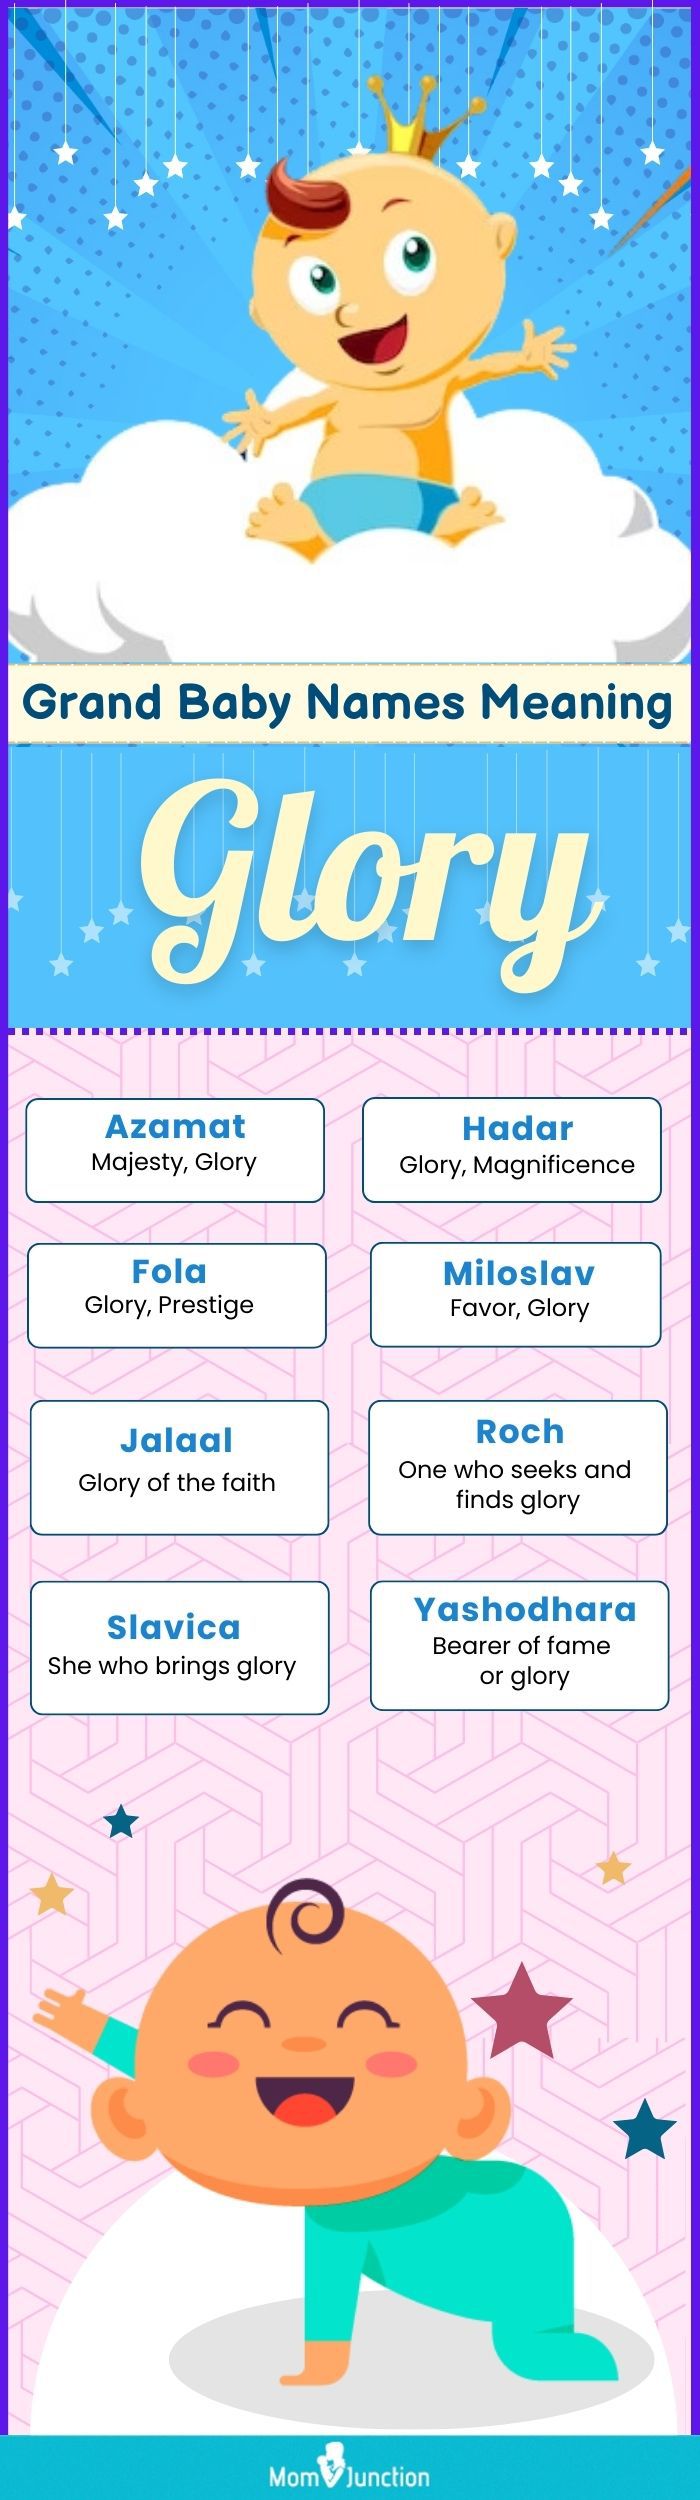 grand baby names meaning glory (infographic)